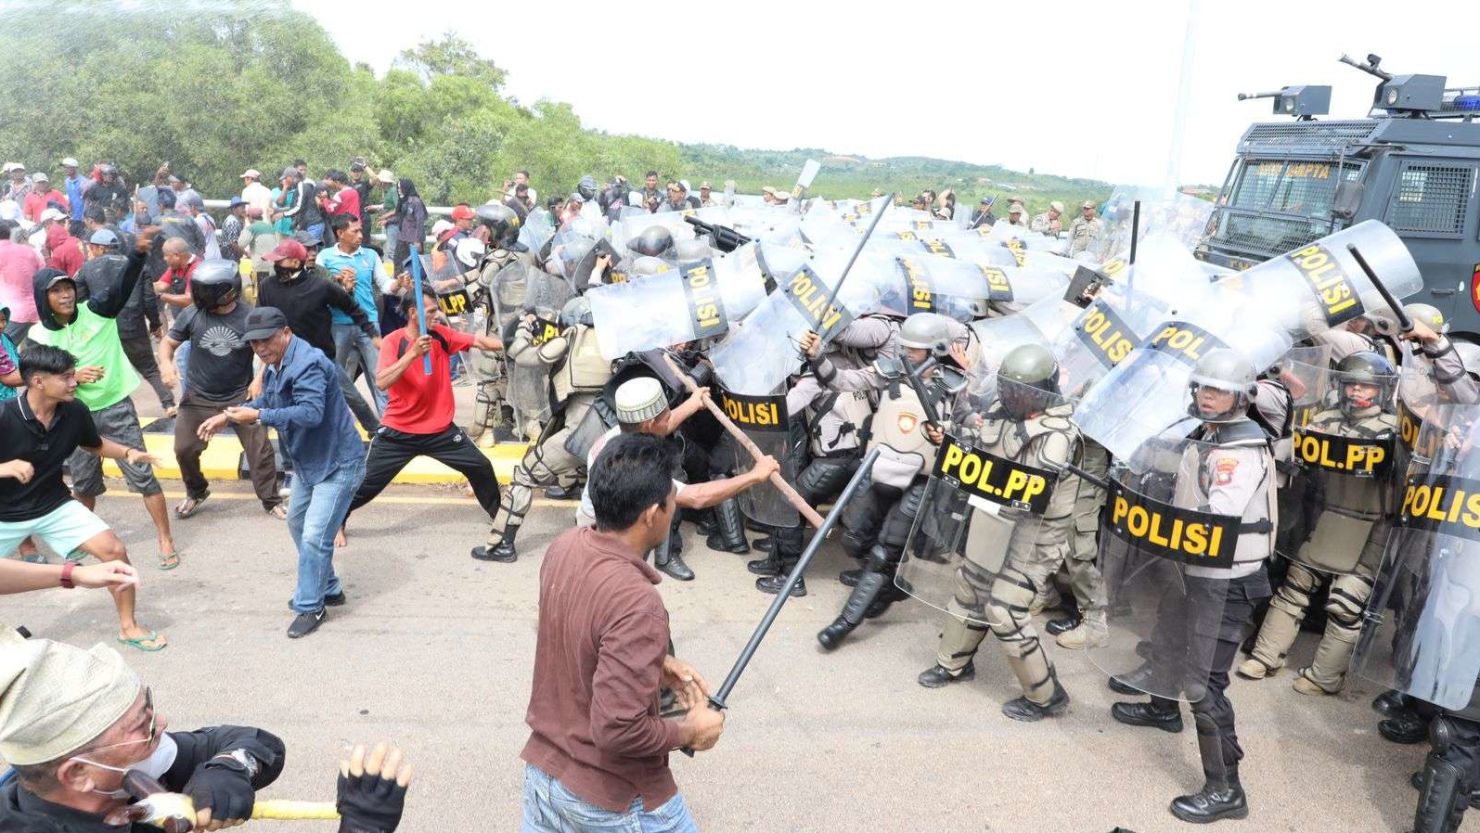 Protesters opposed to resettlement plans clashed with riot police on September 11 outside government offices in Batam